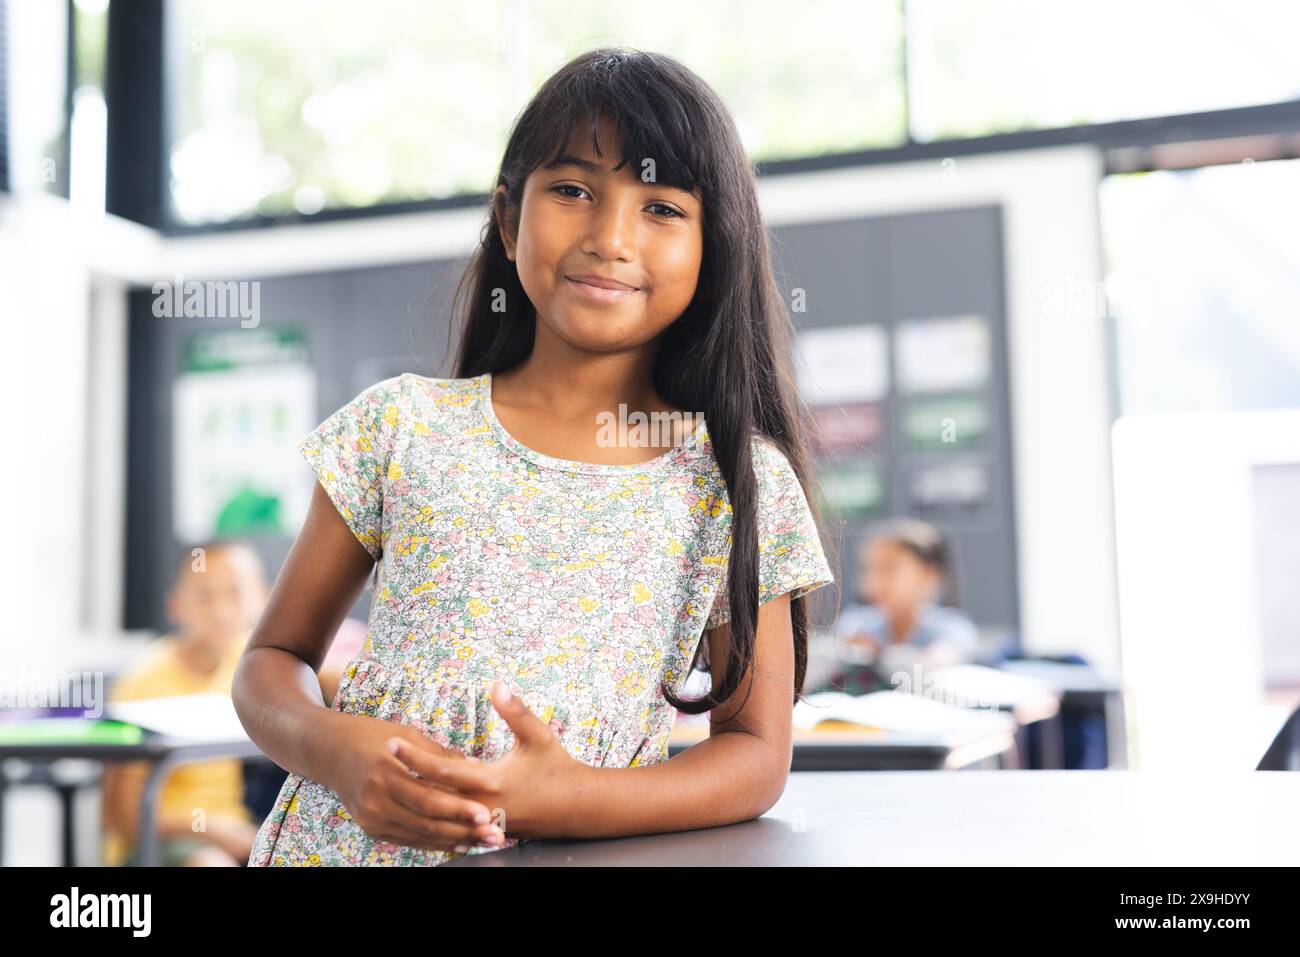 Biracial girl with long brown hair stands smiling in a school classroom Stock Photo